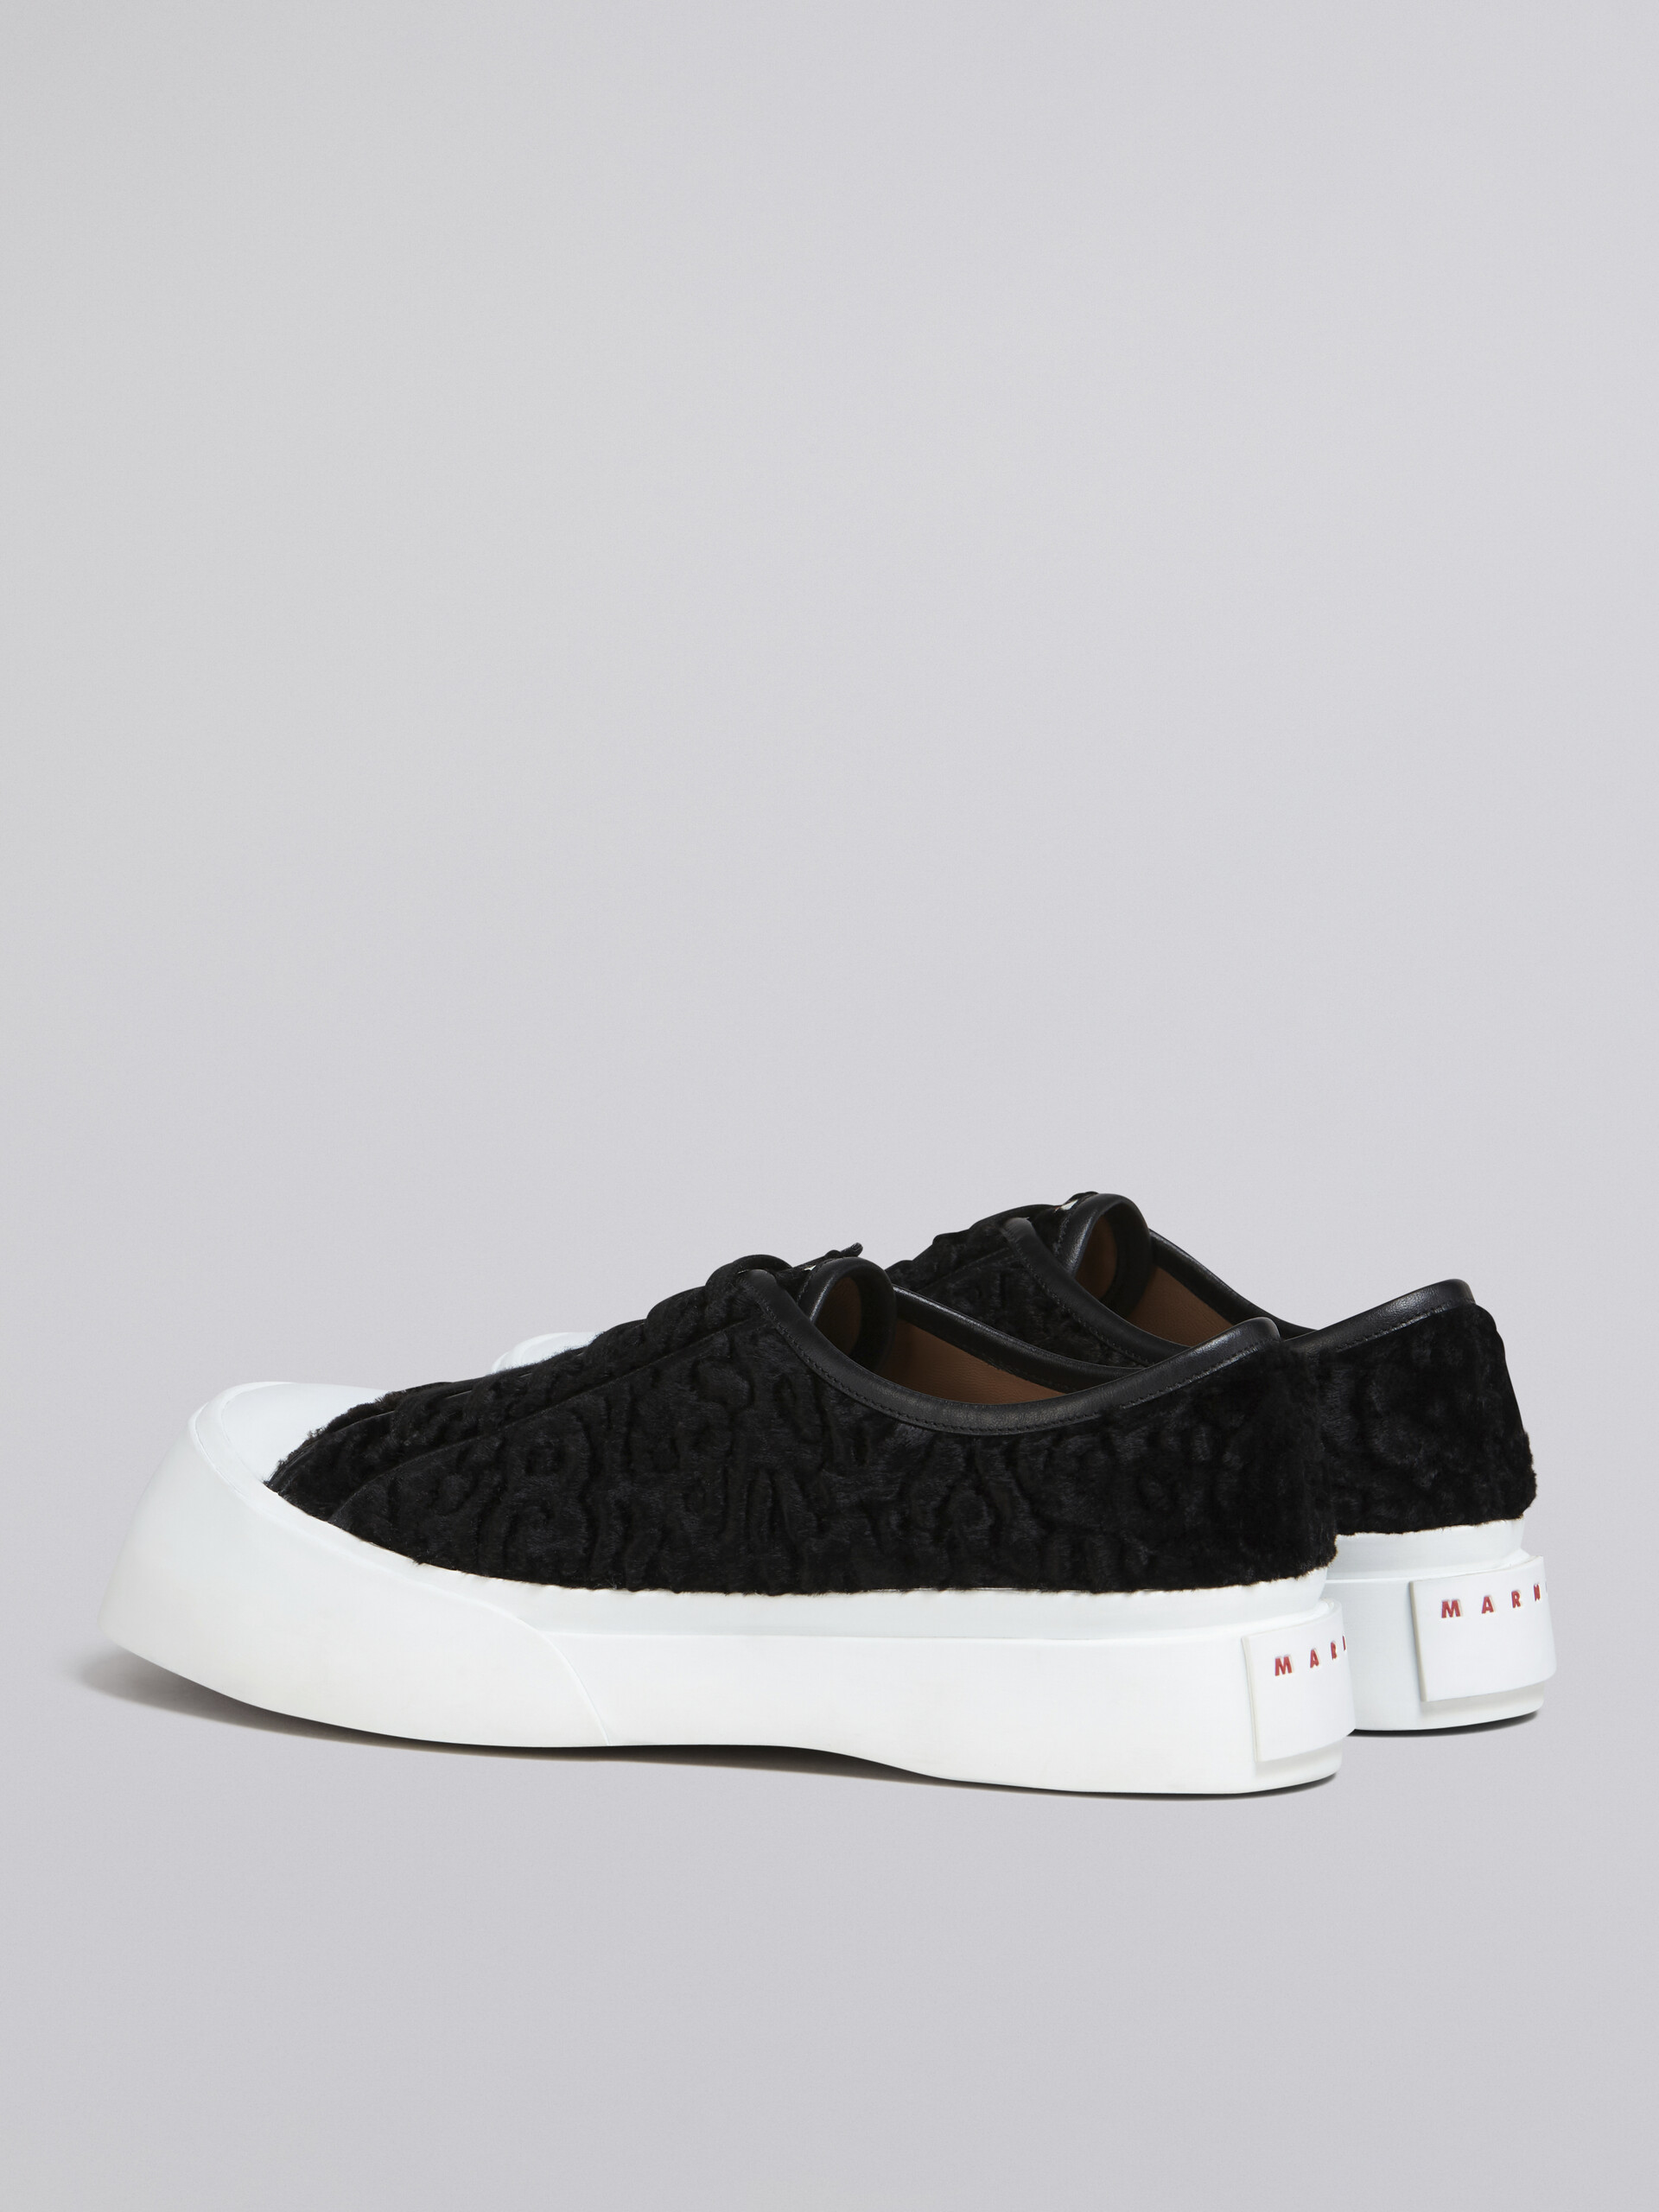 Black soft calf leather PABLO sneaker - Sneakers - Image 3